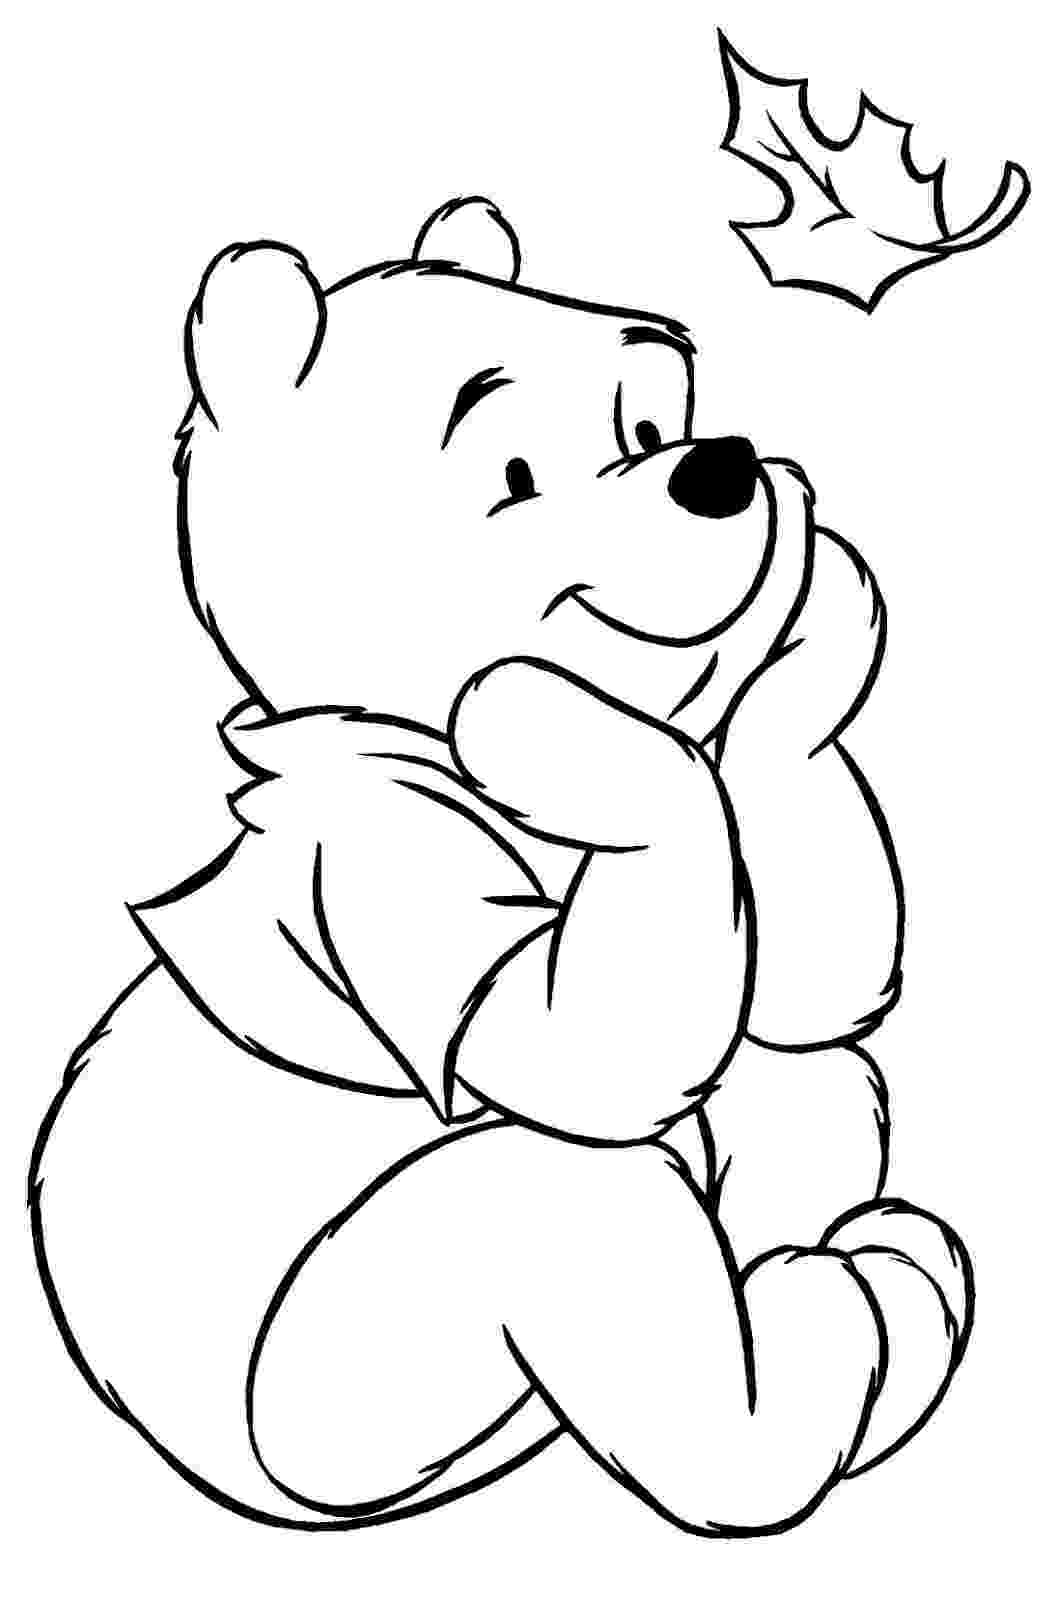 coloring pages of disney characters walt disney coloring pages goofy walt disney pages coloring of disney characters 